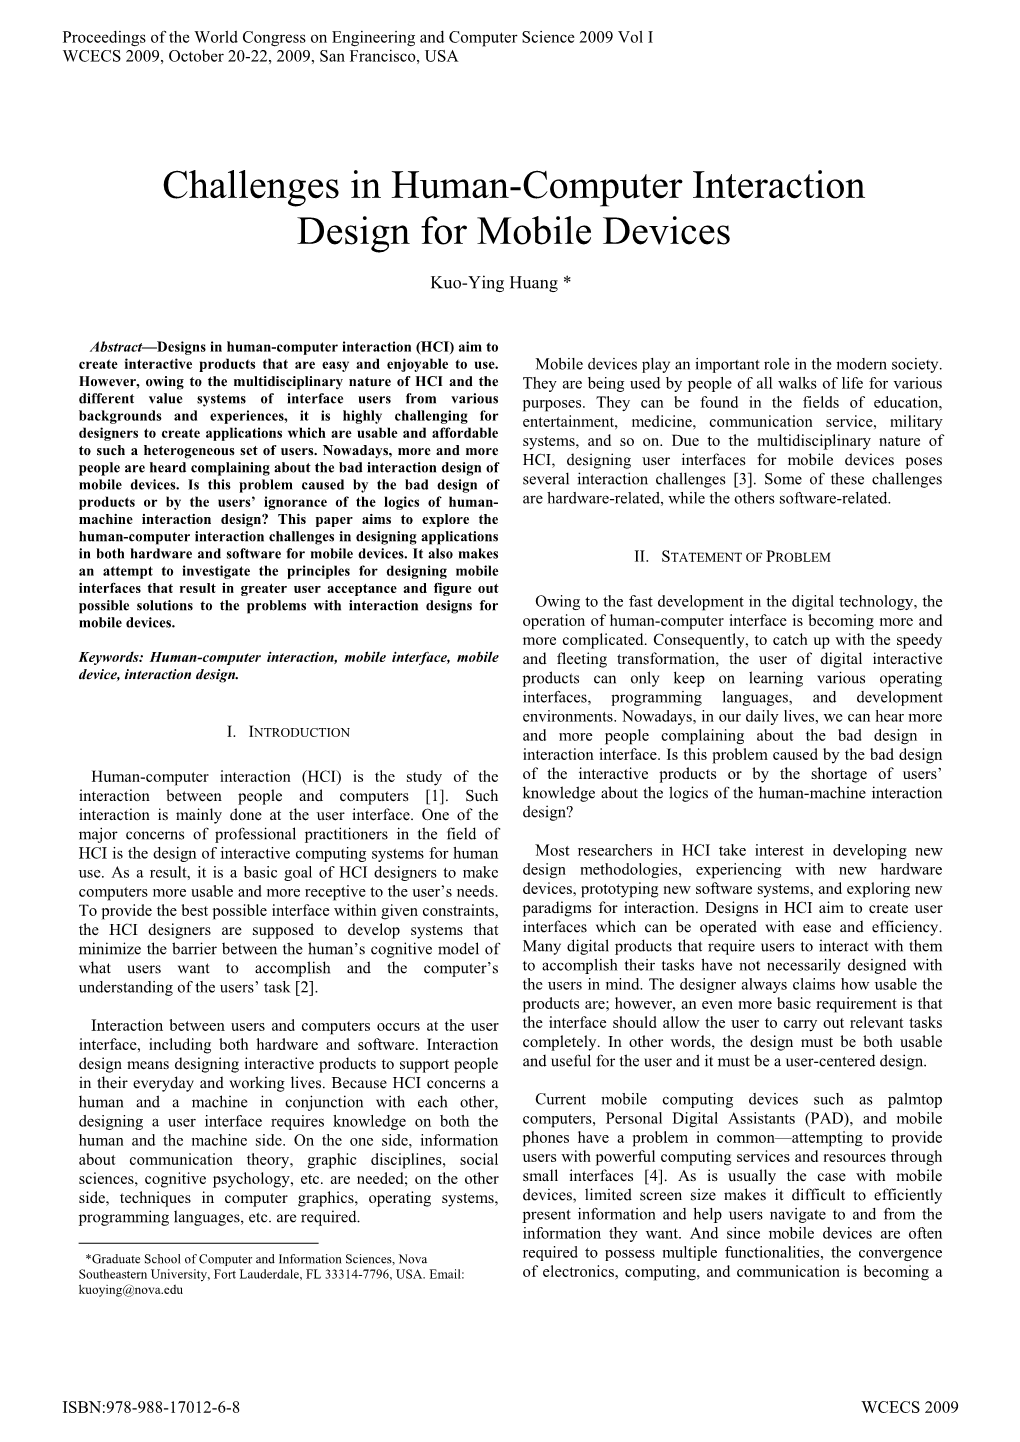 Challenges in Human-Computer Interaction Design for Mobile Devices